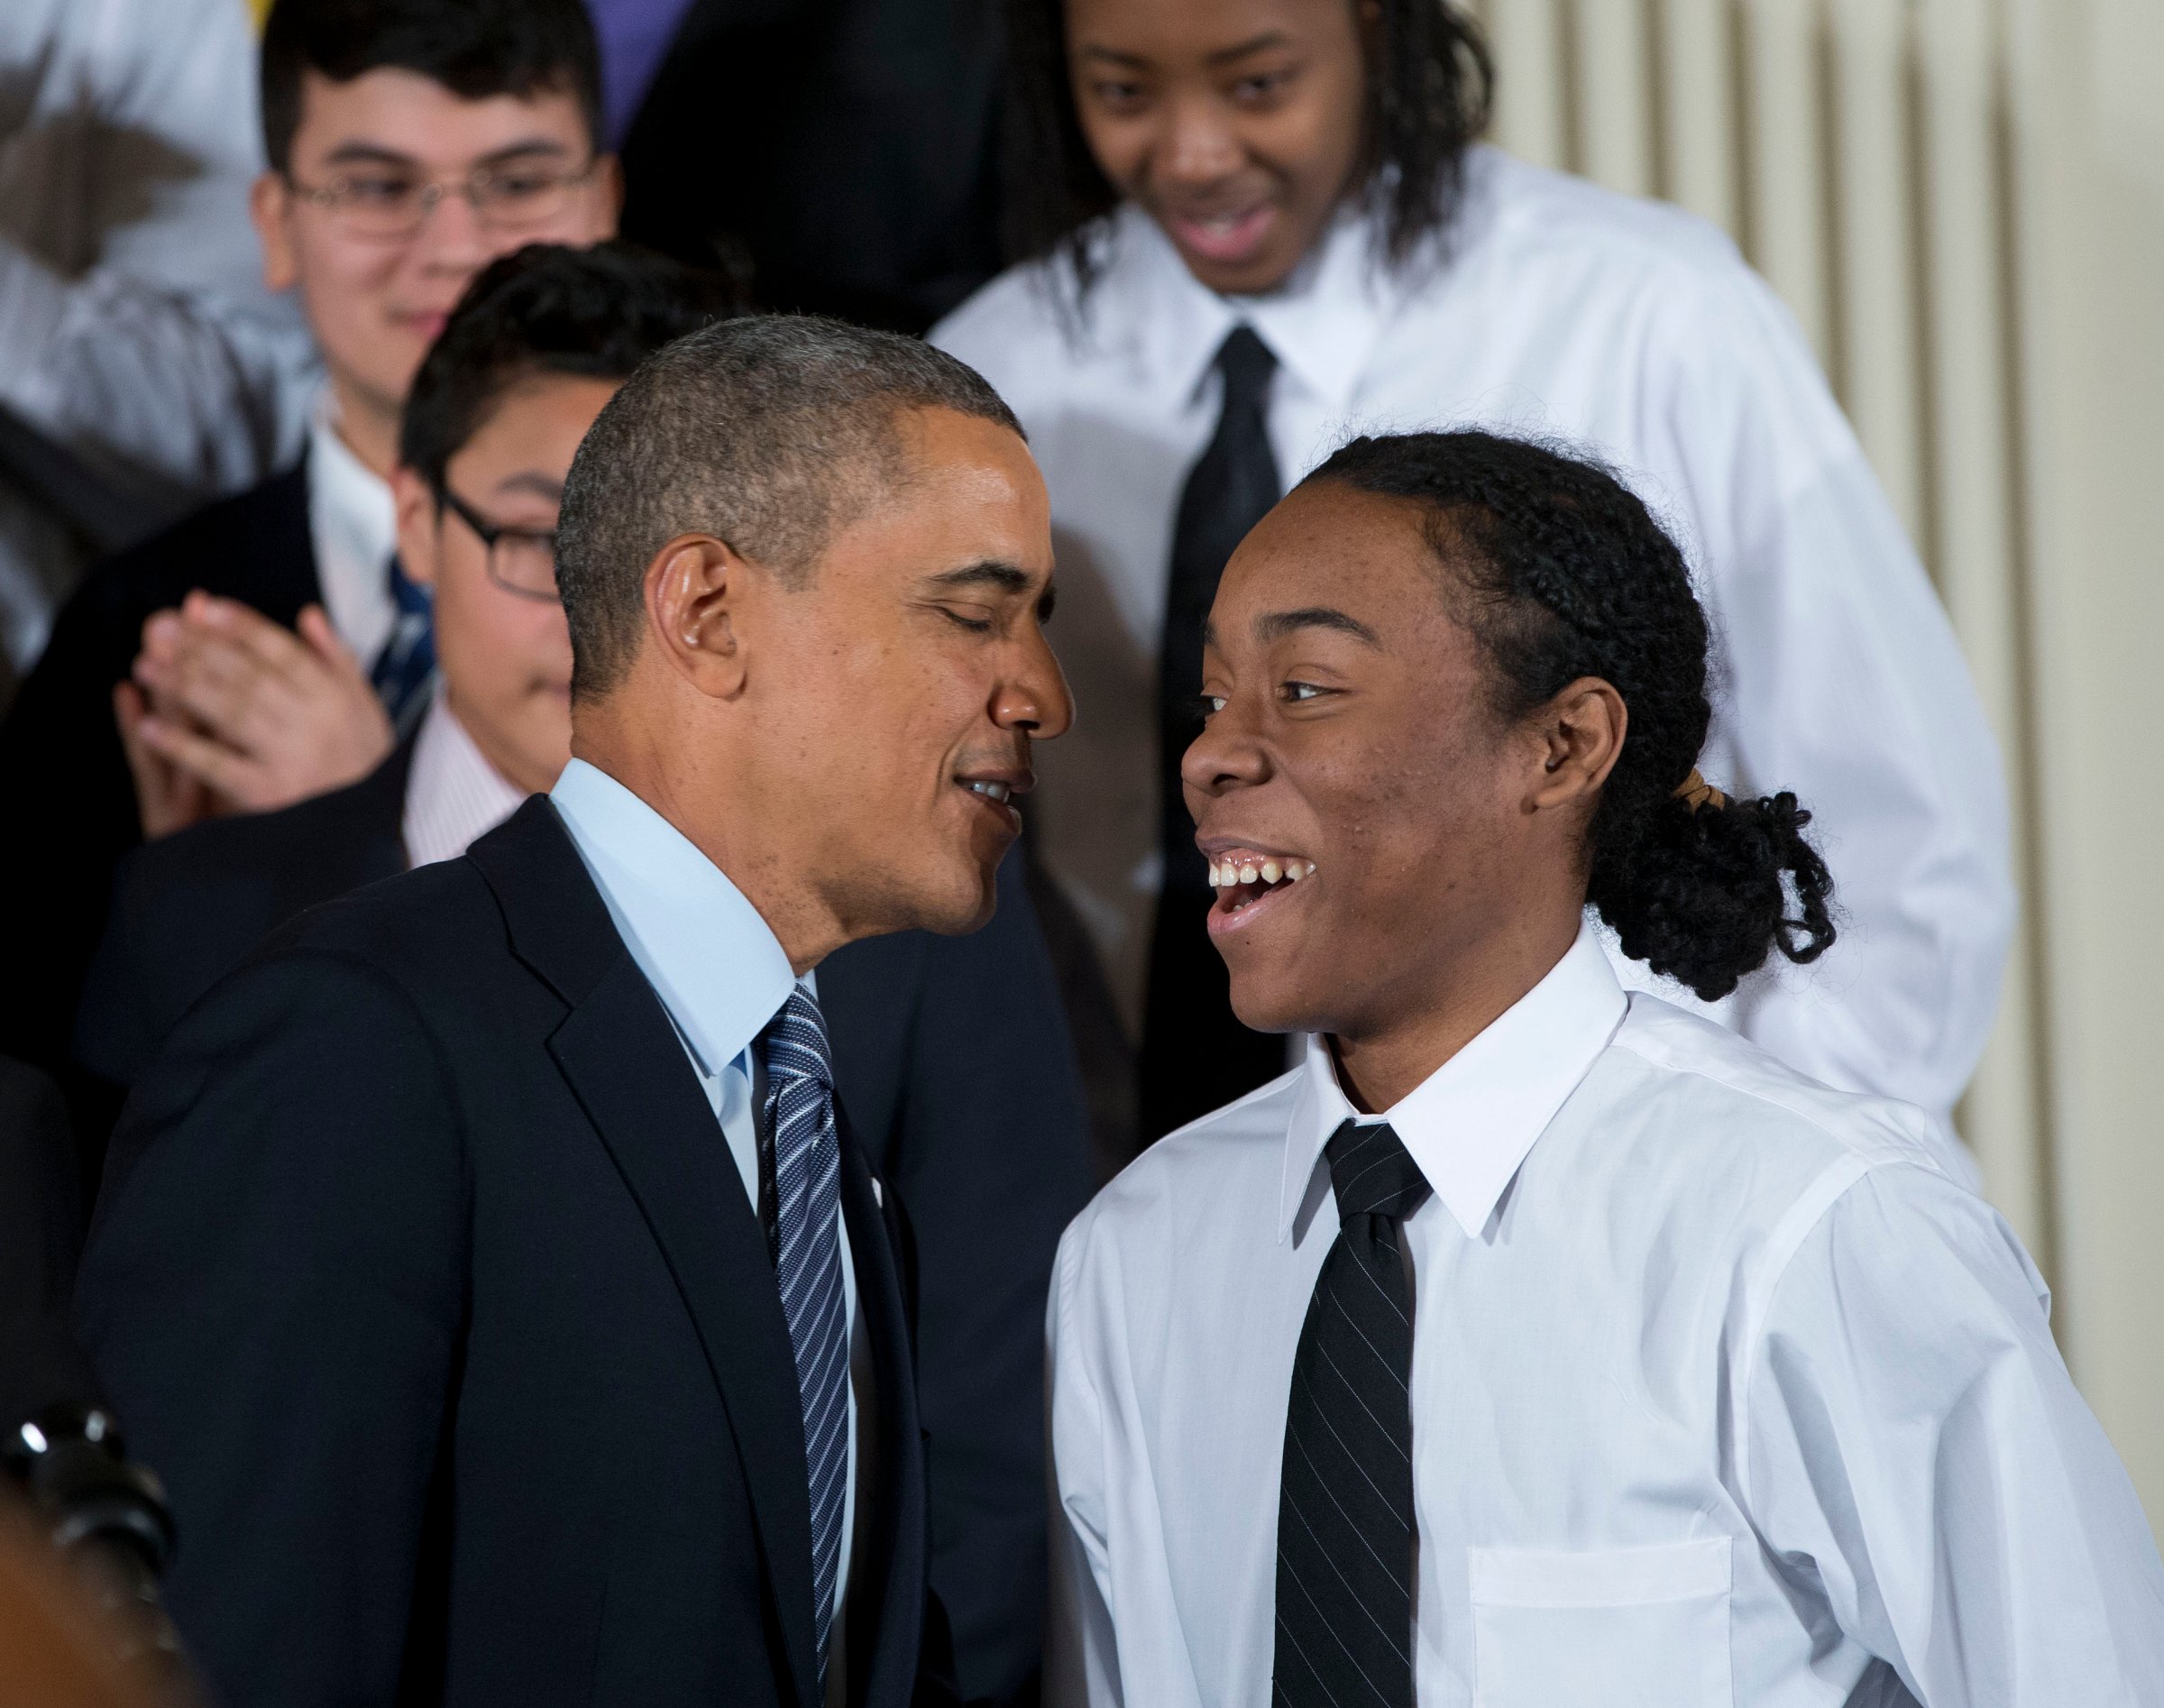 President Barack Obama speaks with Christian Champagne, 18, a senior at Hyde Park Career Academy in Chicago, who introduced him before launching a new initiative to provide greater opportunities for young black and Hispanic men called 'My Brother's Keeper' Thursday, Feb. 27, 2014, in the East Room of the White House in Washington.